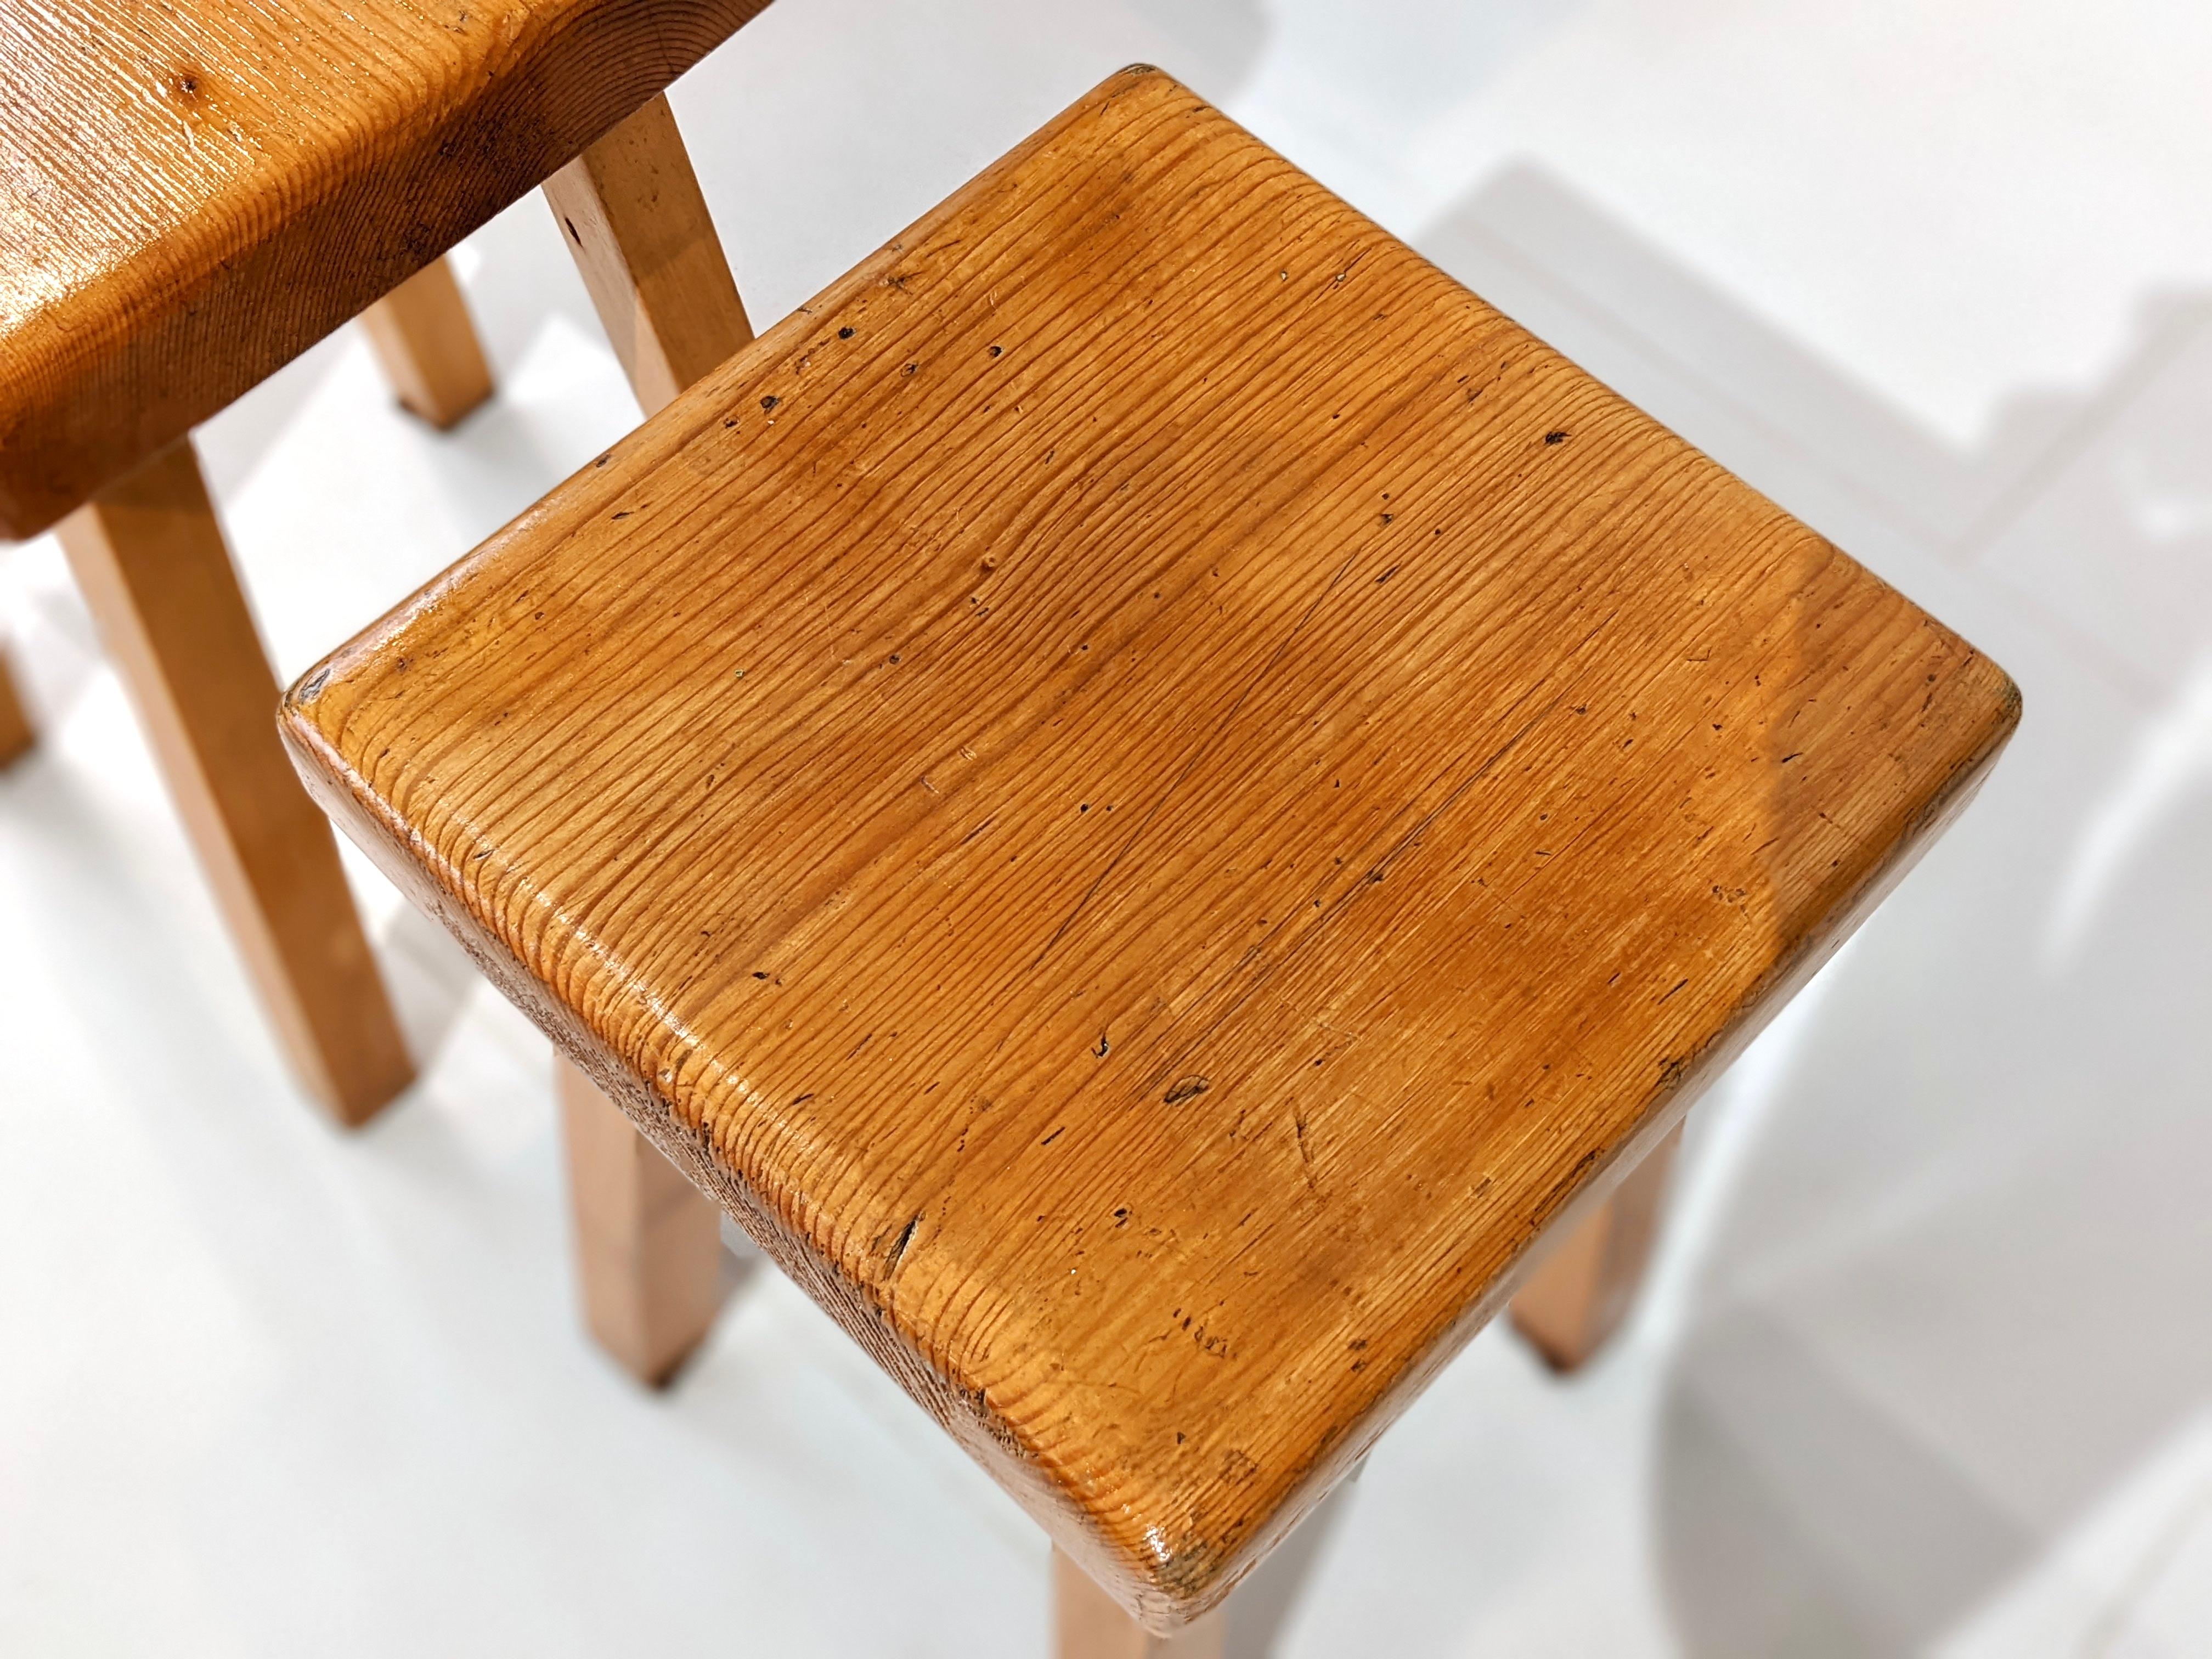 Mid-20th Century Pine Wood Stool by Charlotte Perriand for Les Arcs 1800 For Sale